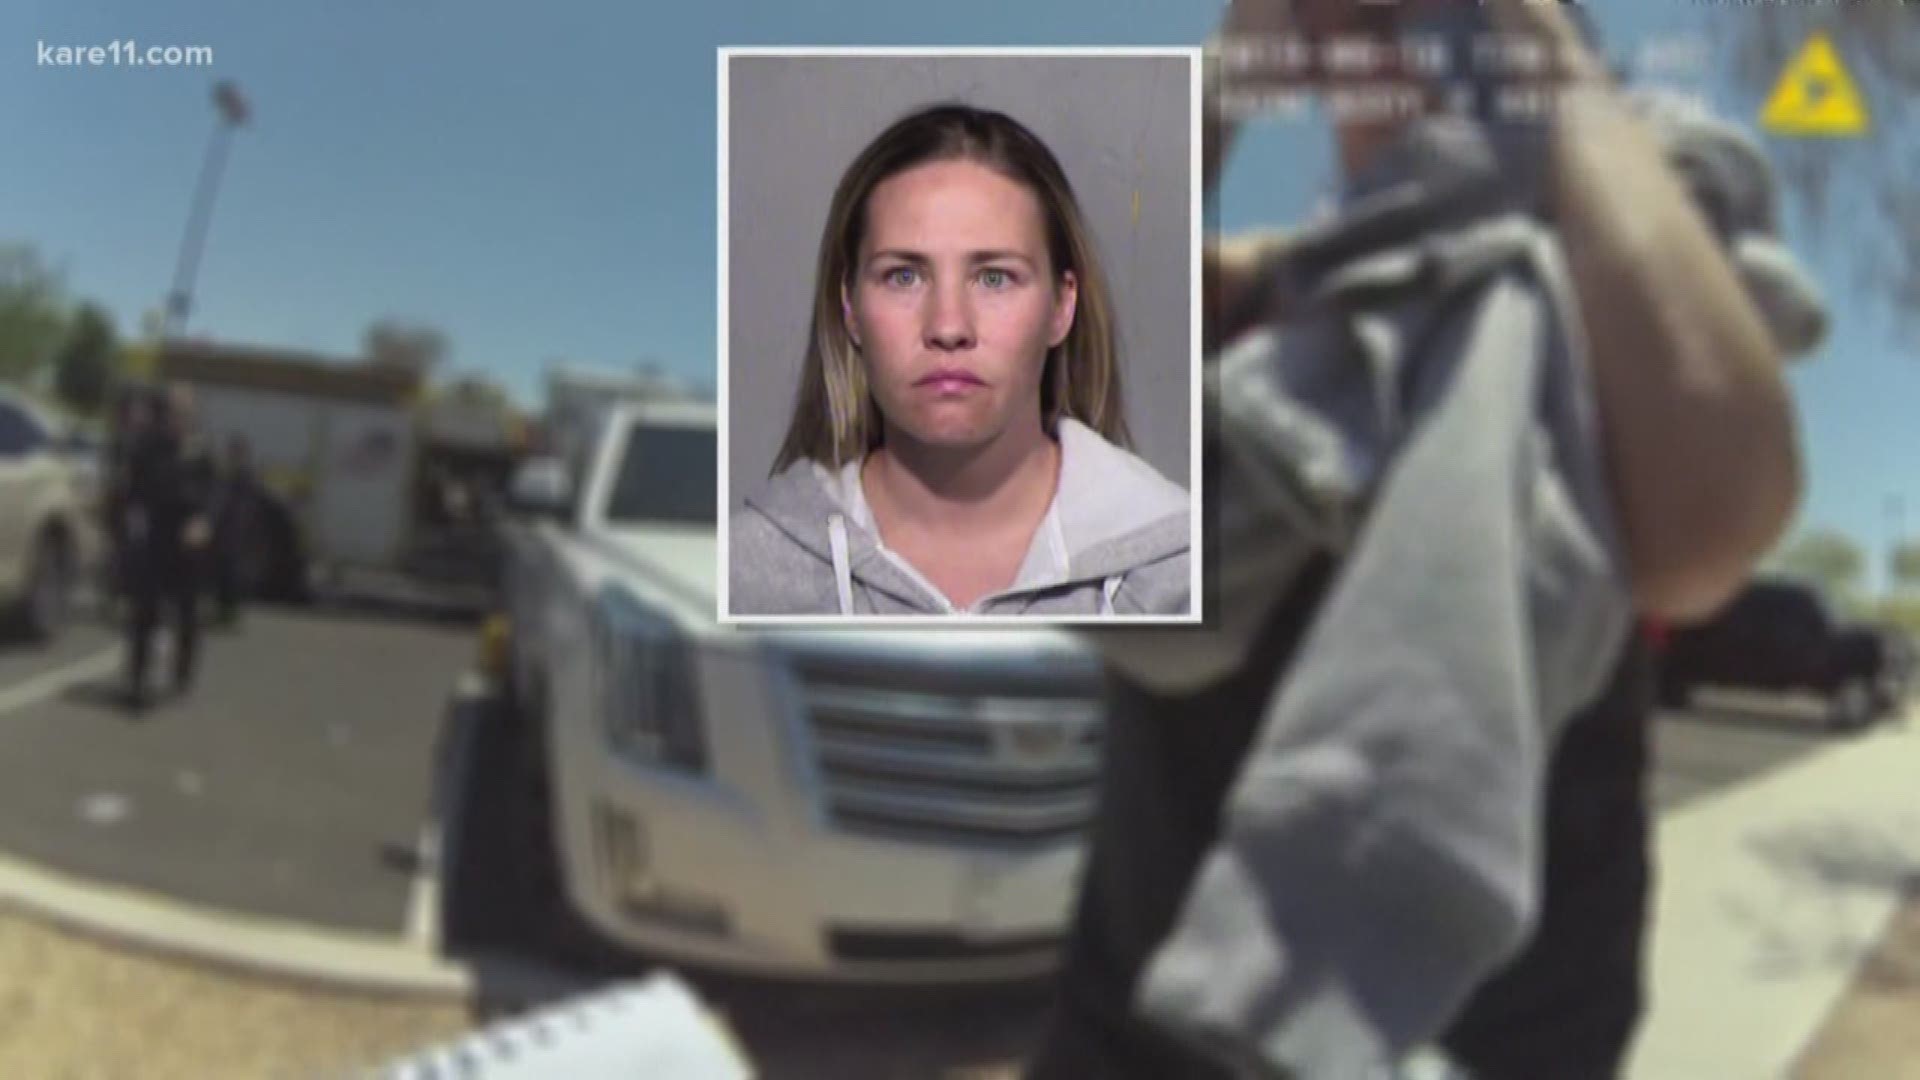 An Arizona mom is charged after leaving her 5-month-old in a hot car for almost an hour while she shopped. Is it a criminal act, or an honest mistake?